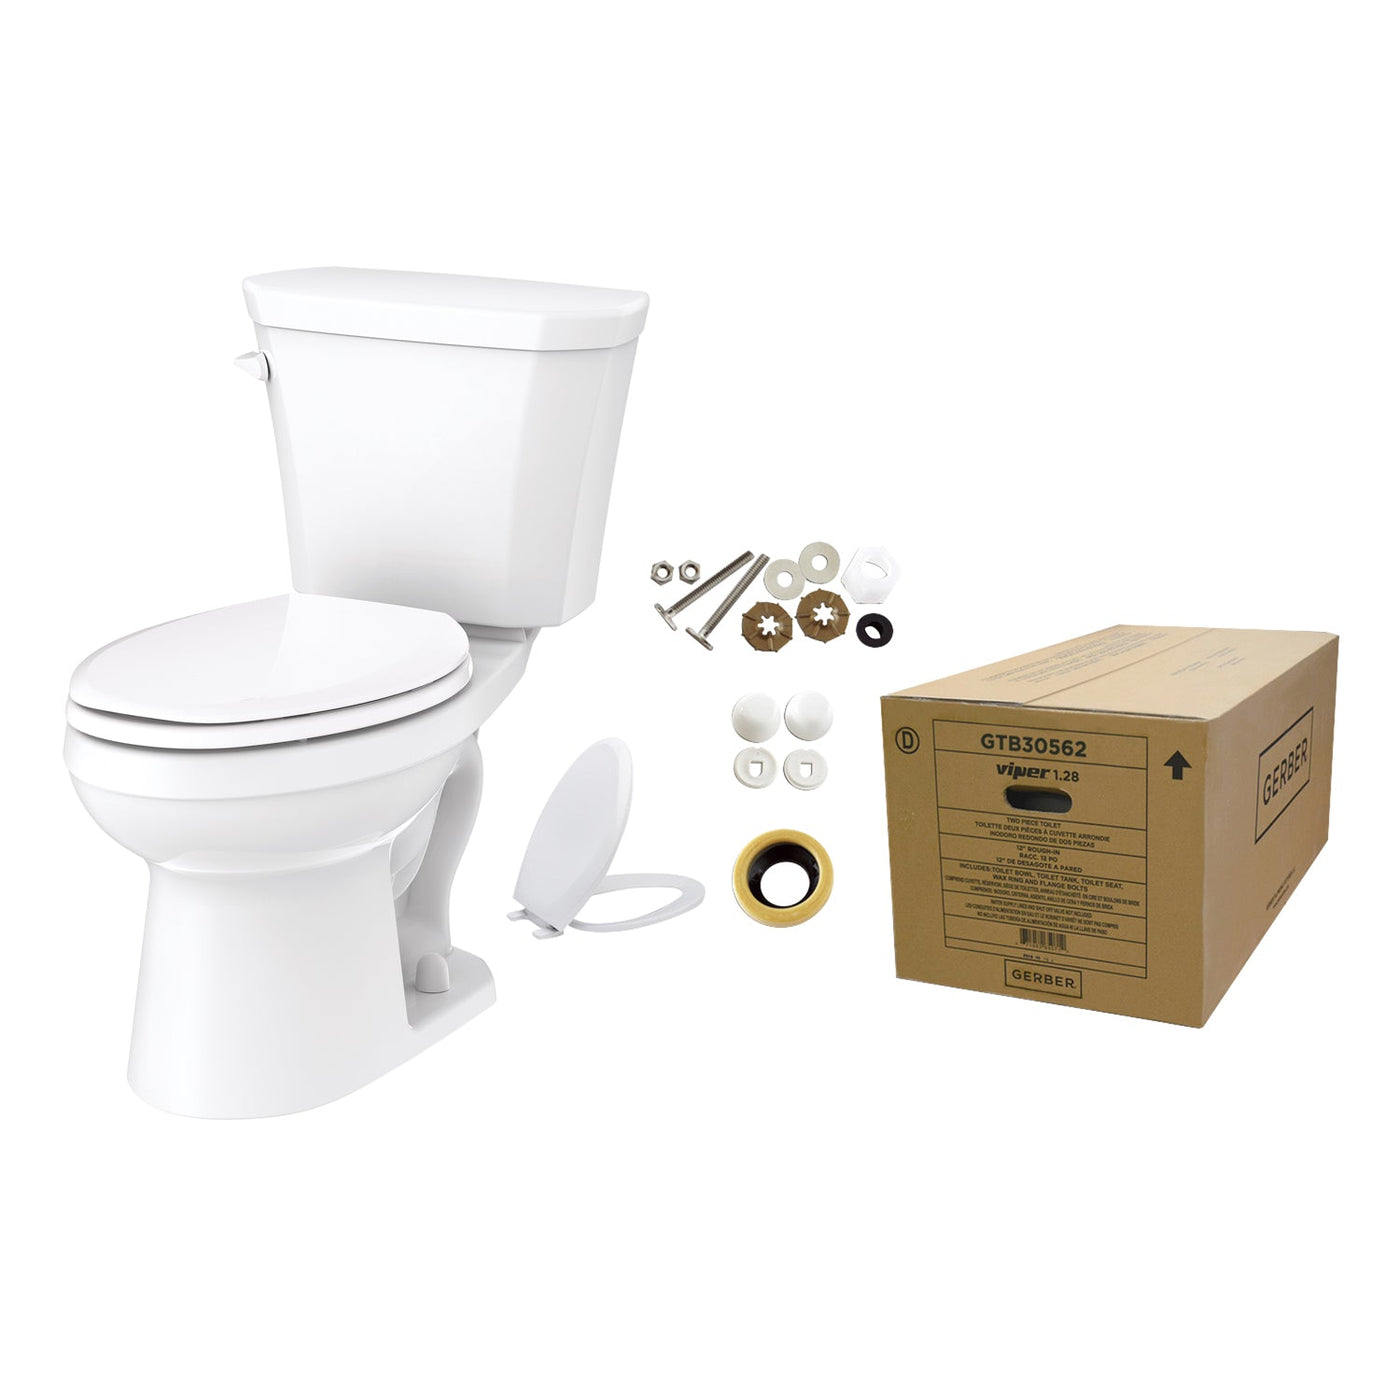 Viper 1.28gpf Elongated Toilet-in Box (Tank and Bowl) White